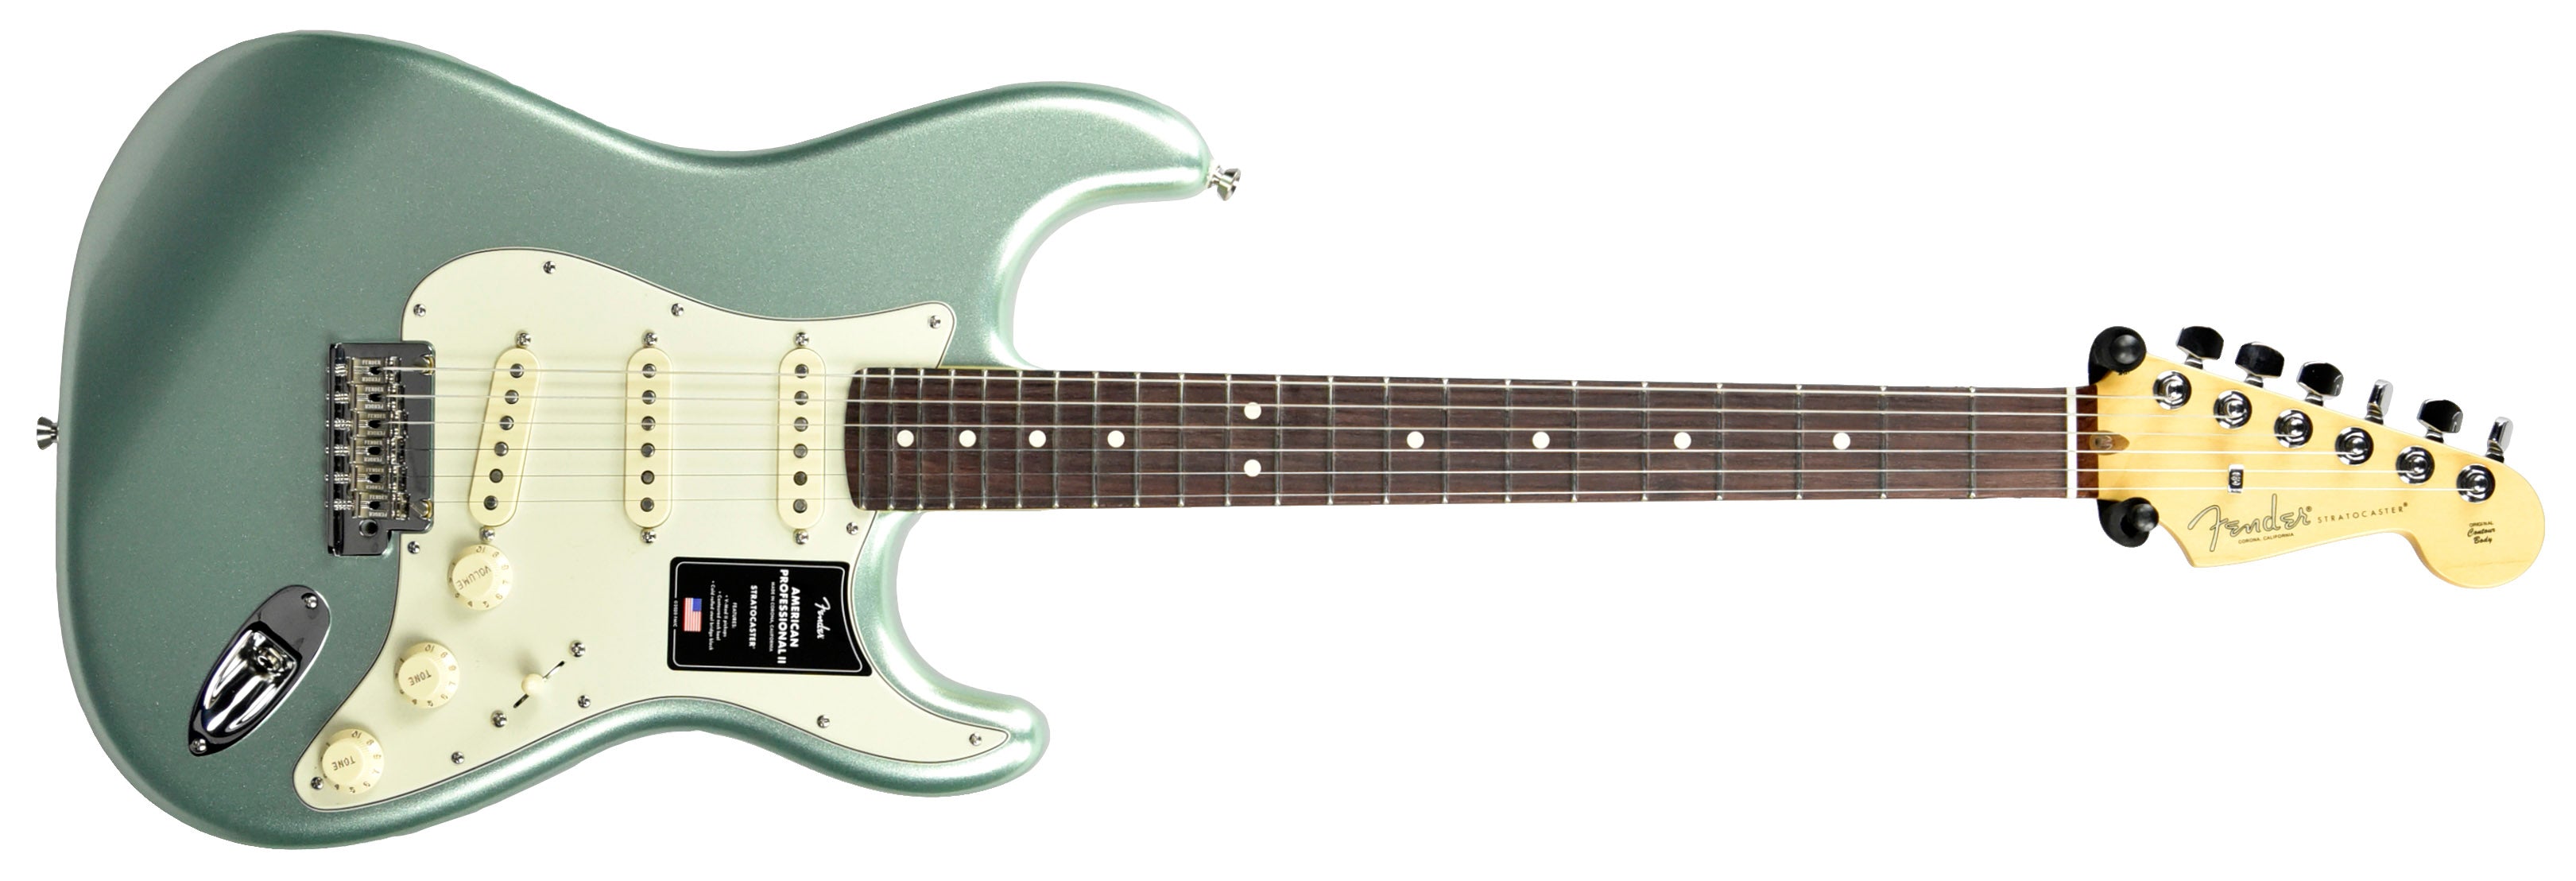 Fender American Professional II Stratocaster in Mystic Surf Green 